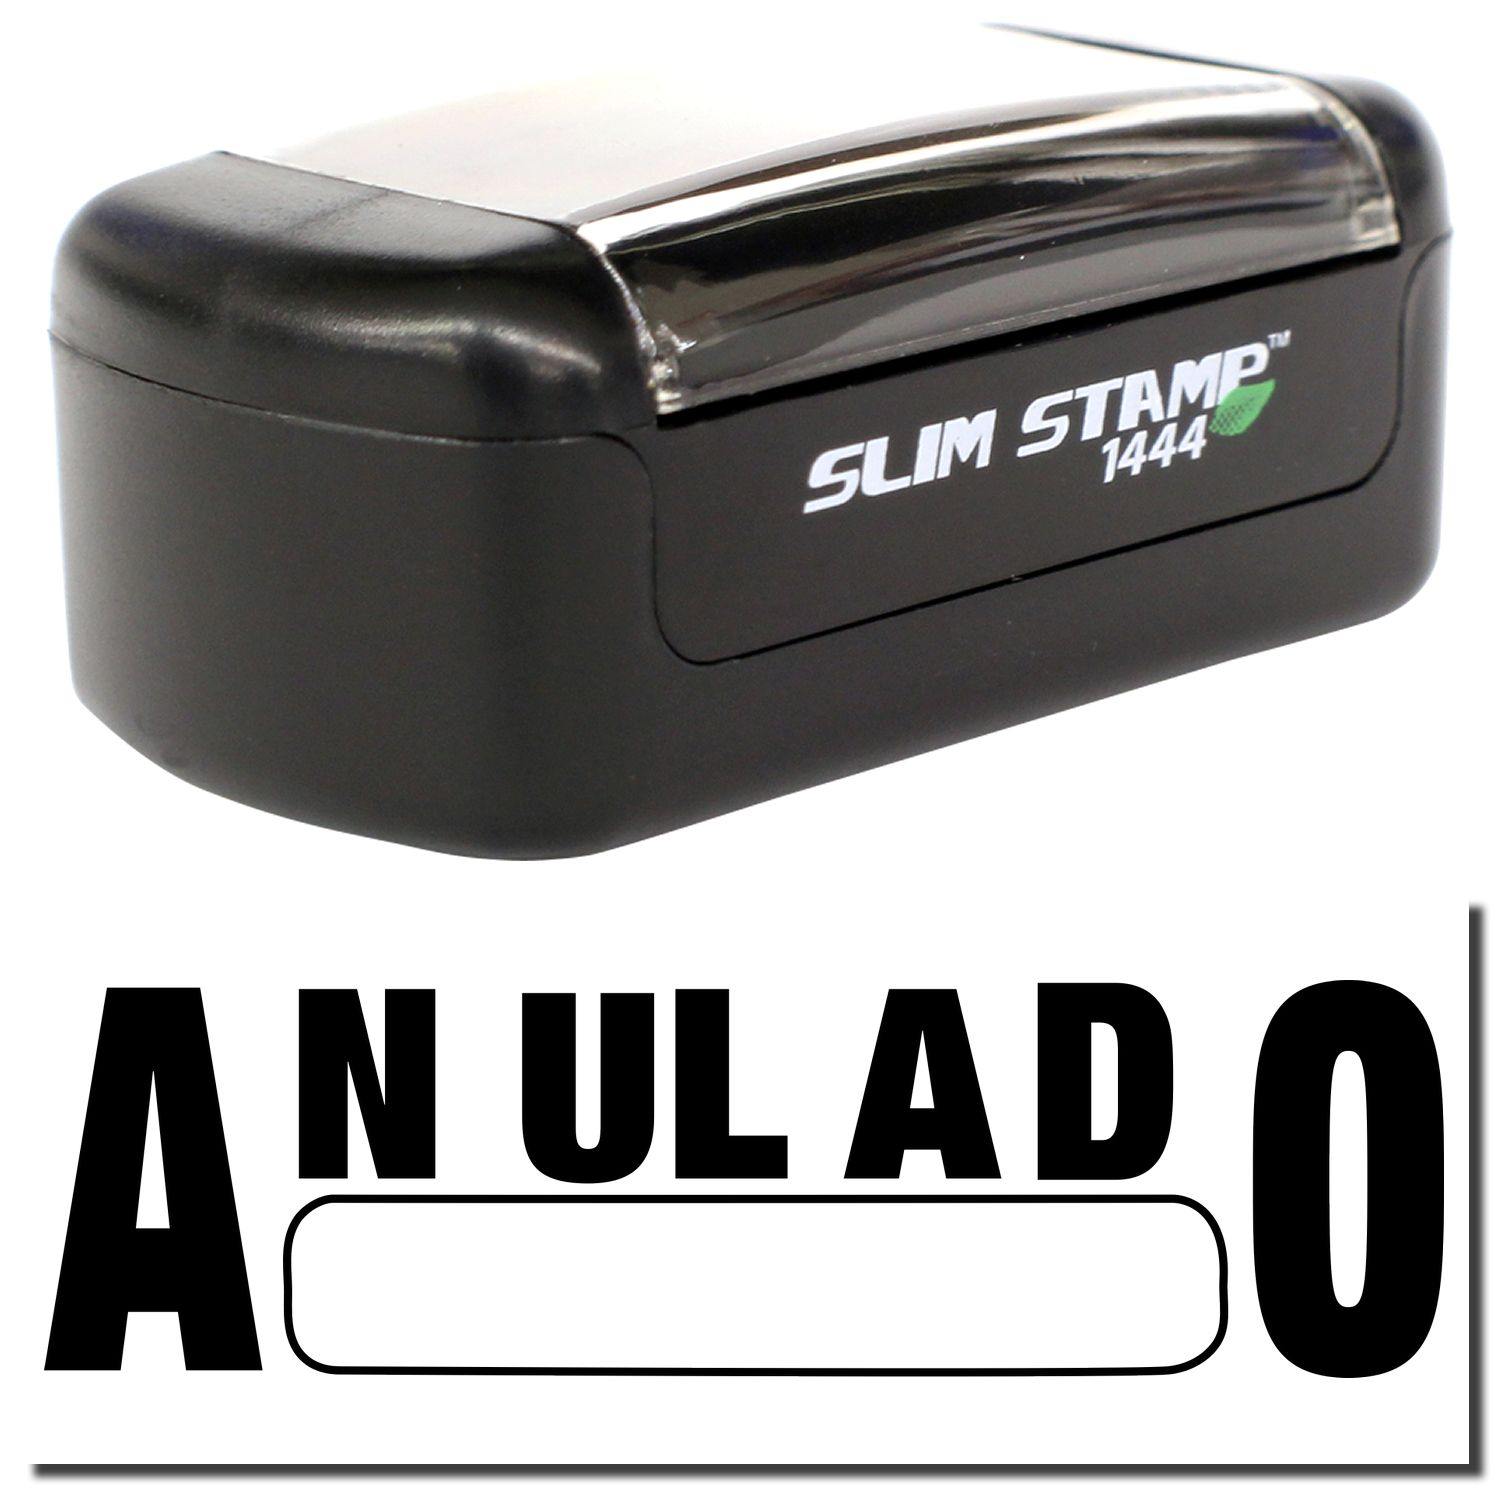 A stock office pre-inked stamp with a stamped image showing how the text "ANULADO" with a box is displayed after stamping.